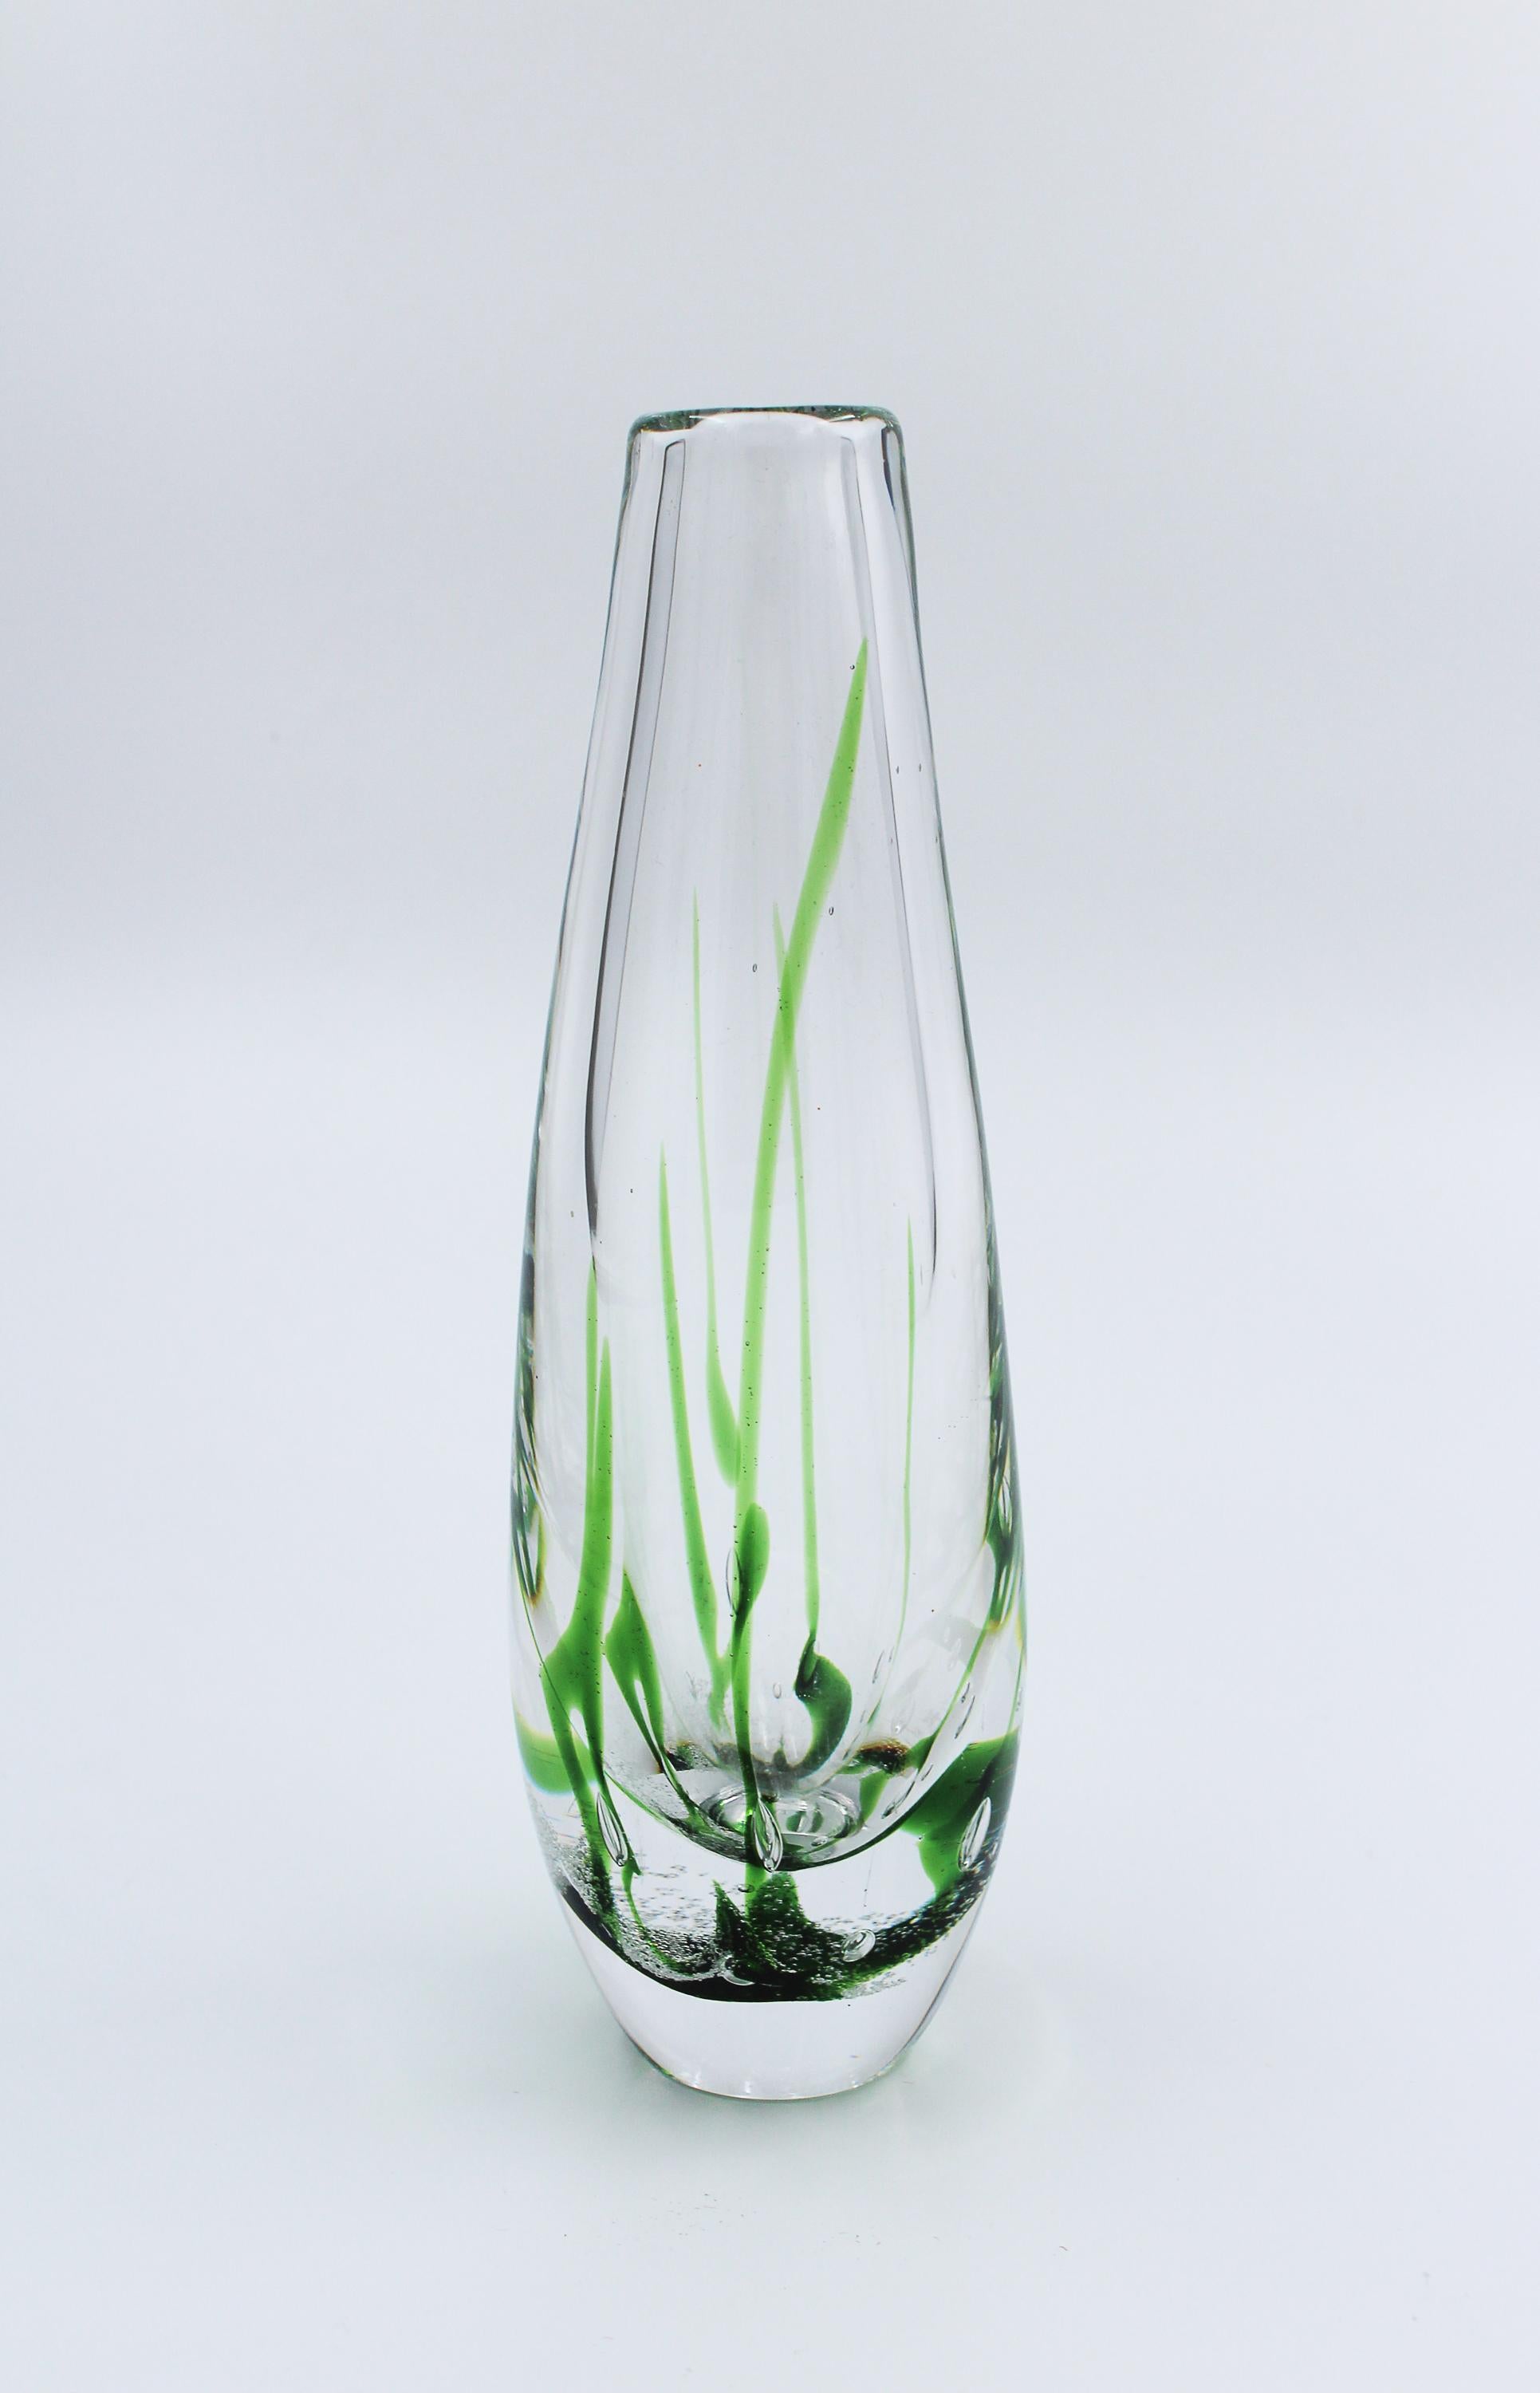 A very decorative midcentury glass vase by Swedish designer Vicke Lindstrand for Kosta. Very good vintage condition.